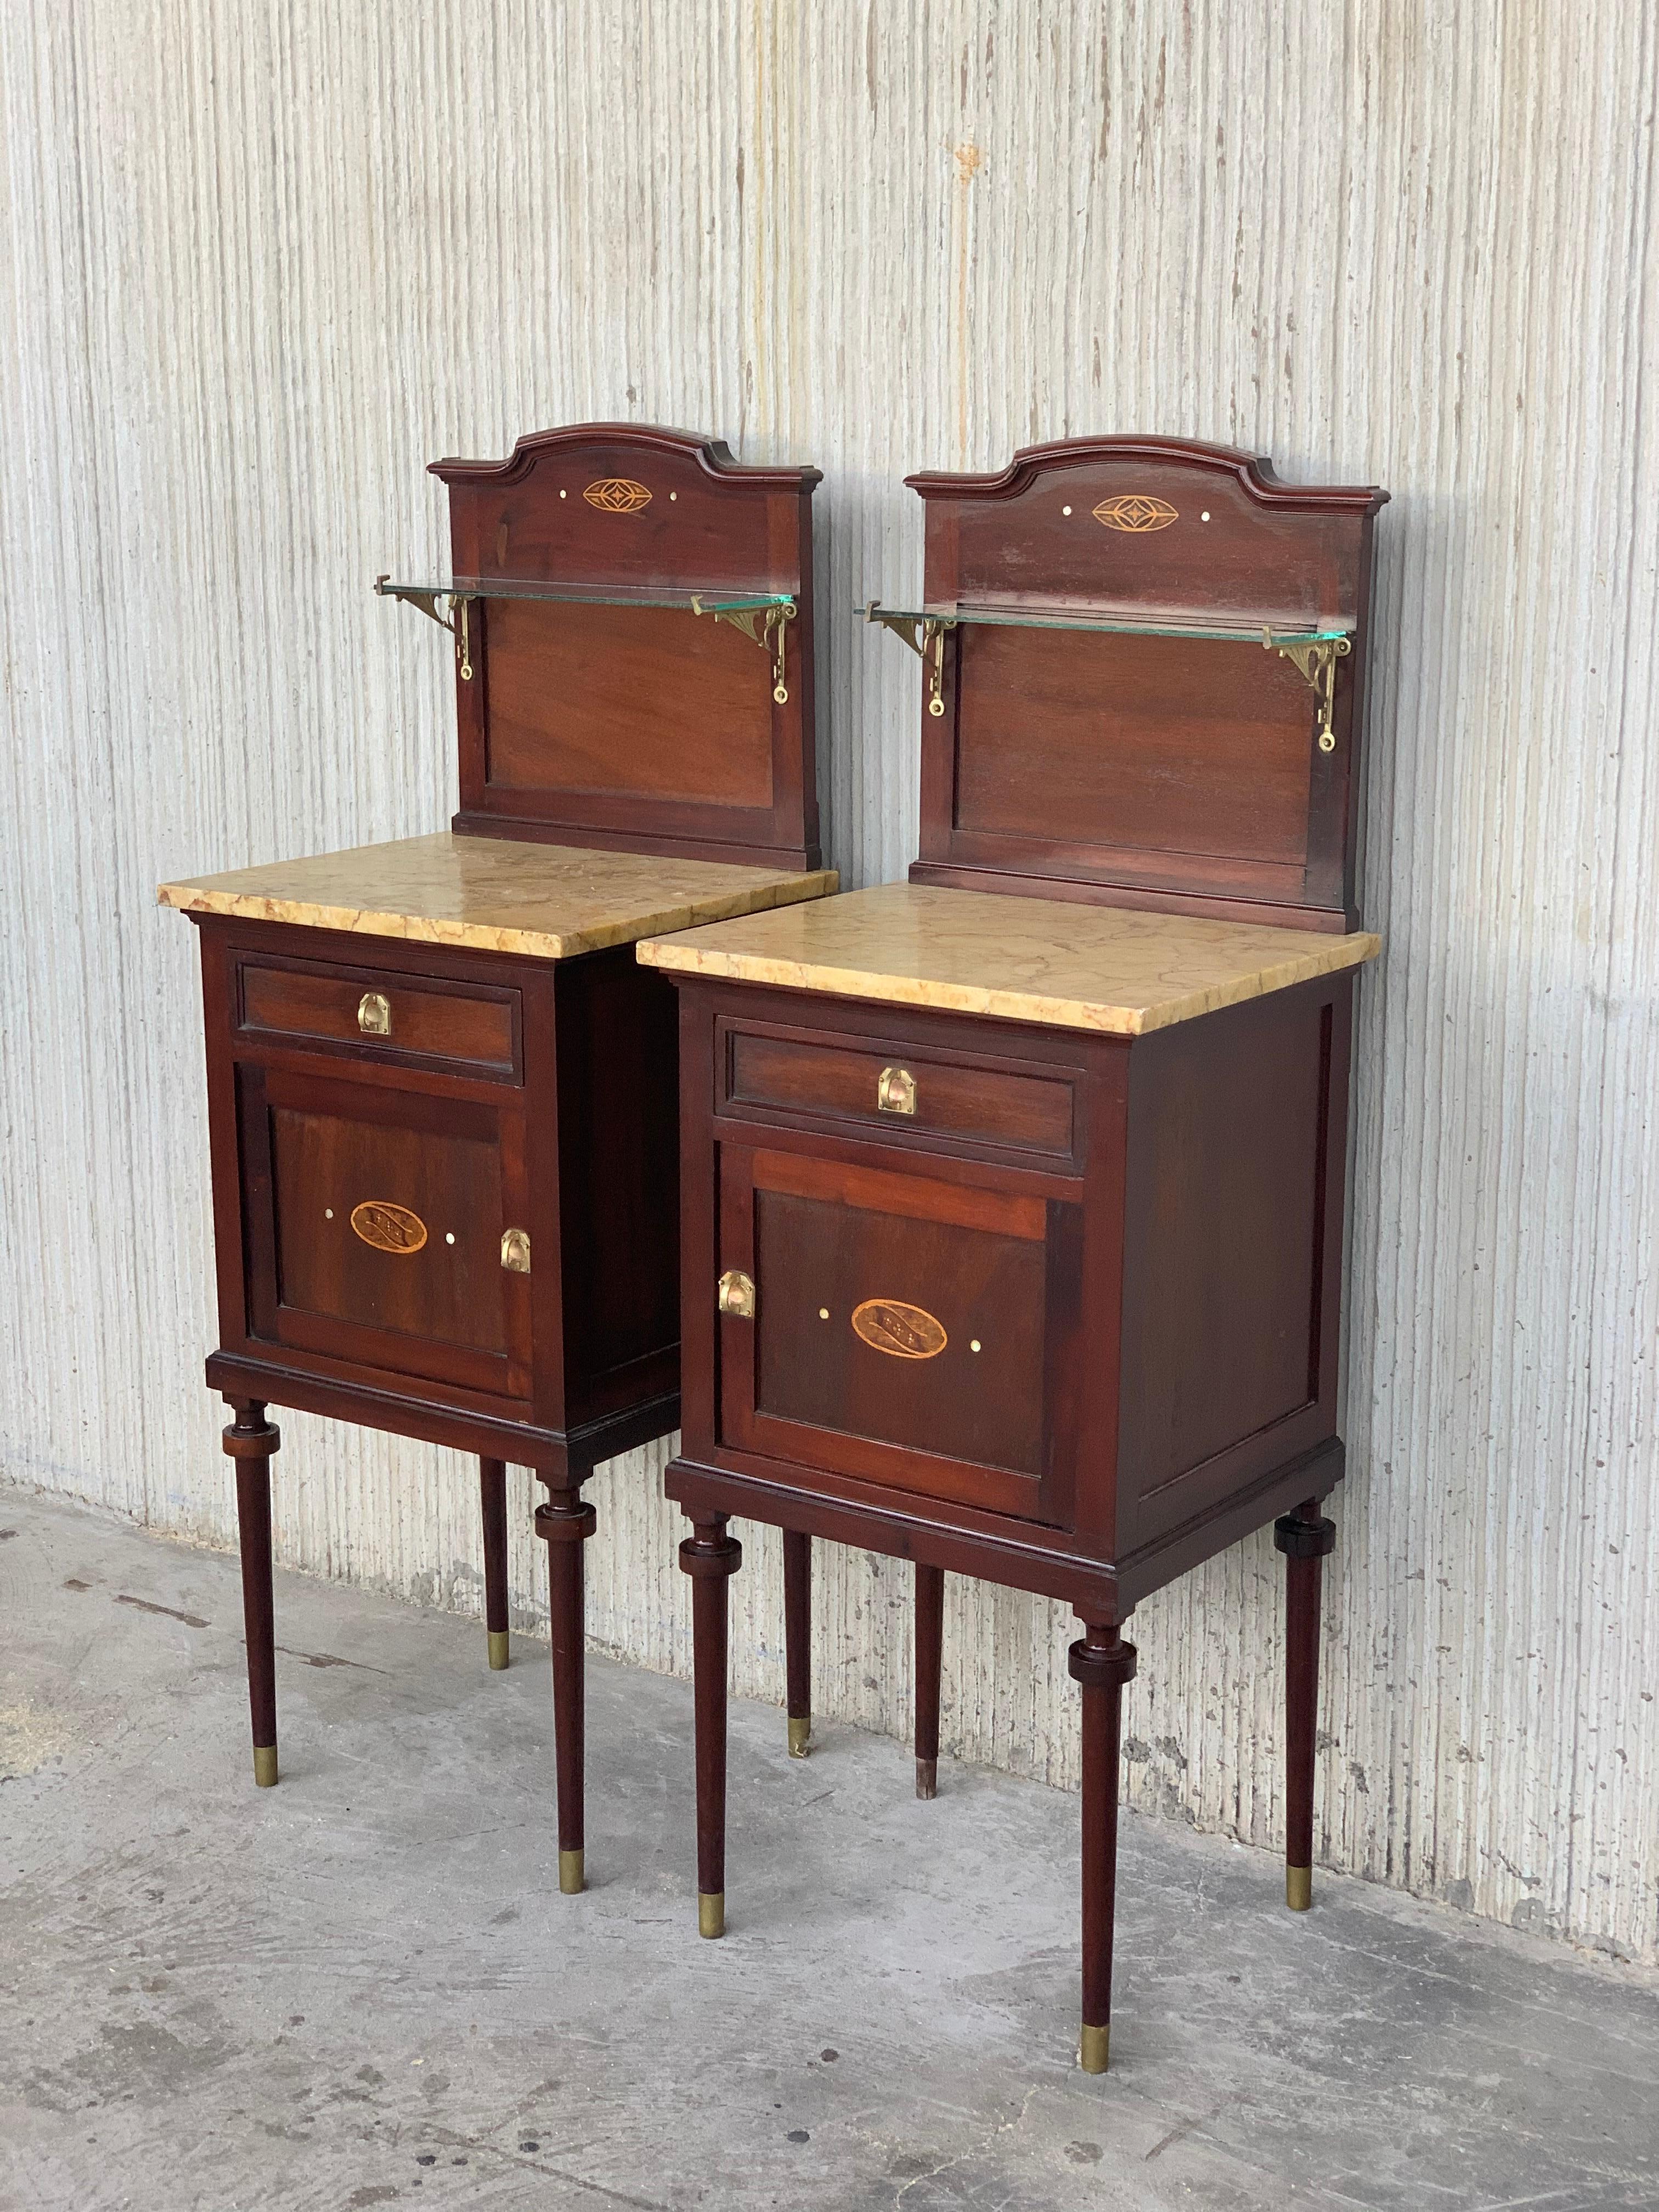 Late 19th century Art Nouveau pair of nightstands in walnut, bronze handles, restored and waxed.
The doors and crest have a marquetry details and a mother pearls circles in both sides 
The inside compartment it´s covered of porcelain.
The needle